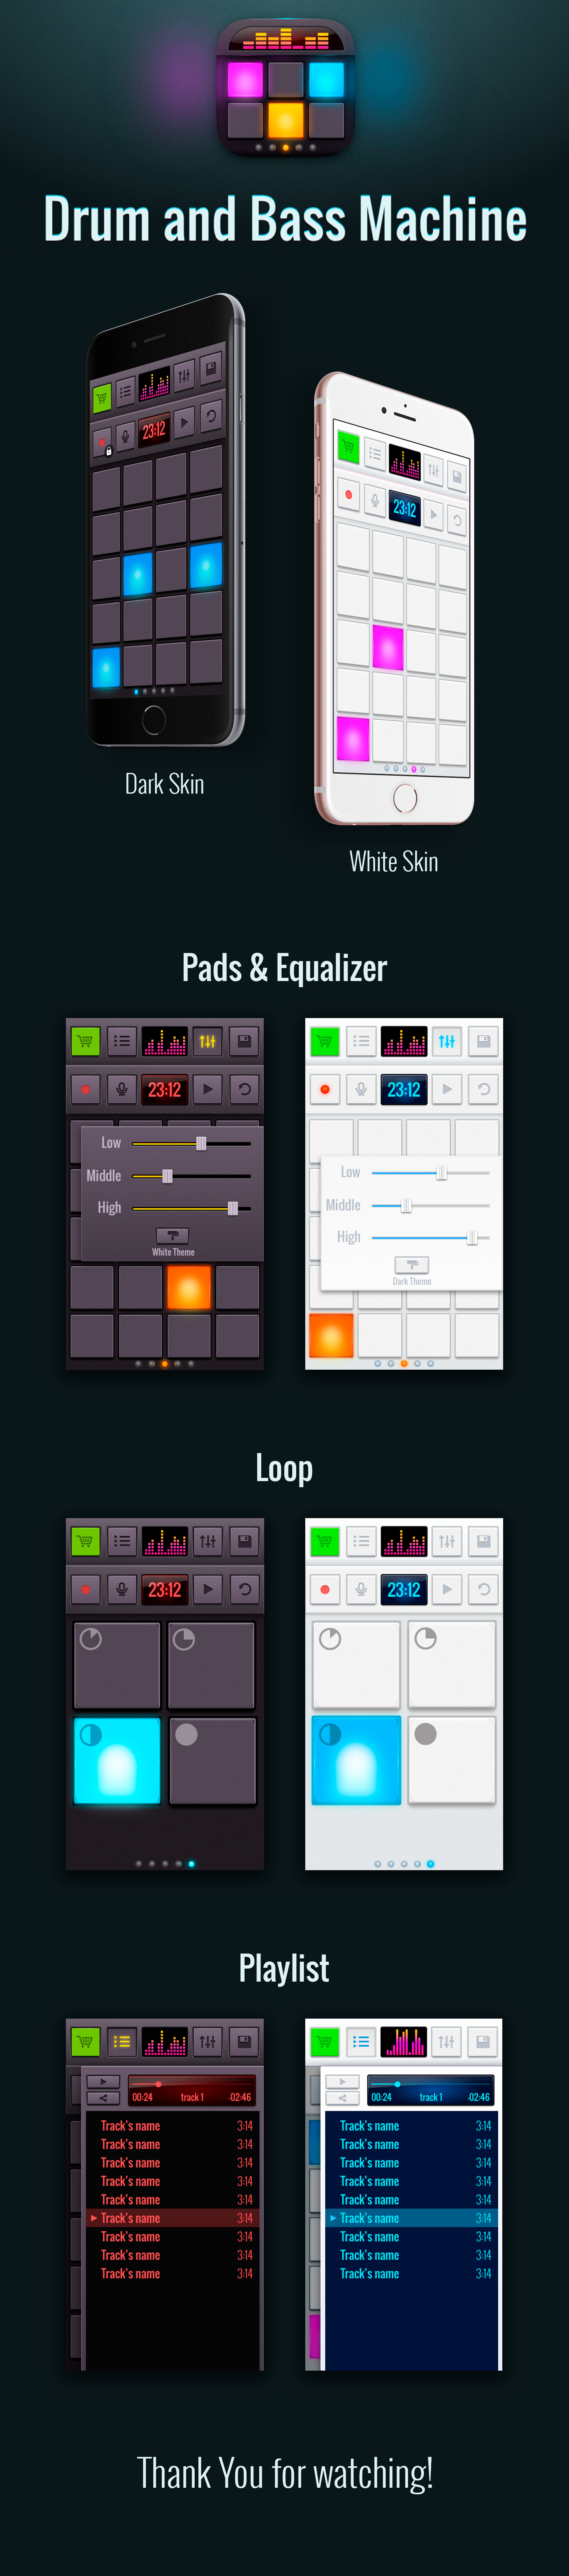 Drum and Bass music app